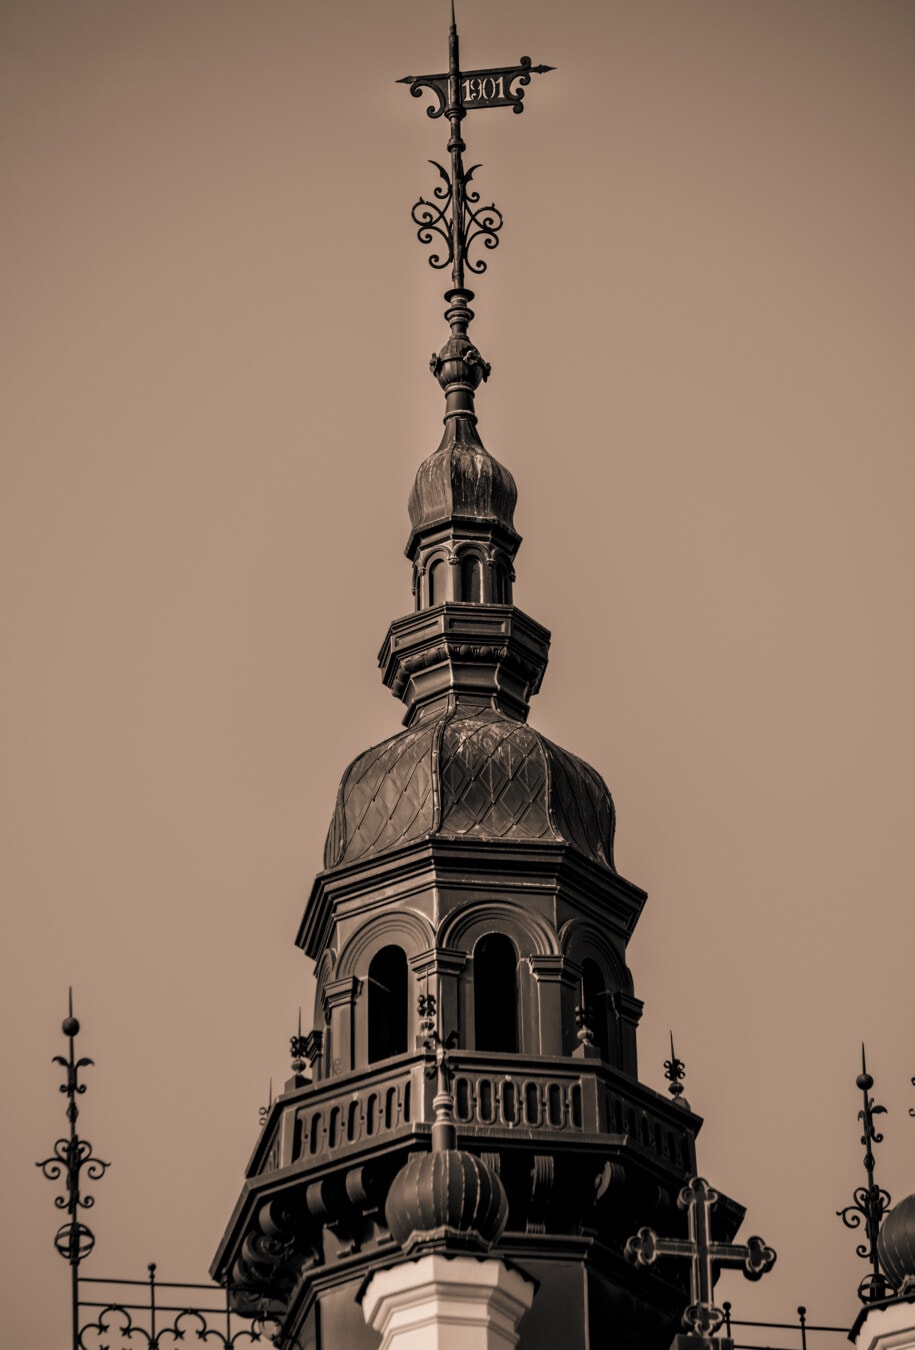 dome, baroque, sepia, tower, architectural style, cast iron, historic, roof, rooftop, copper